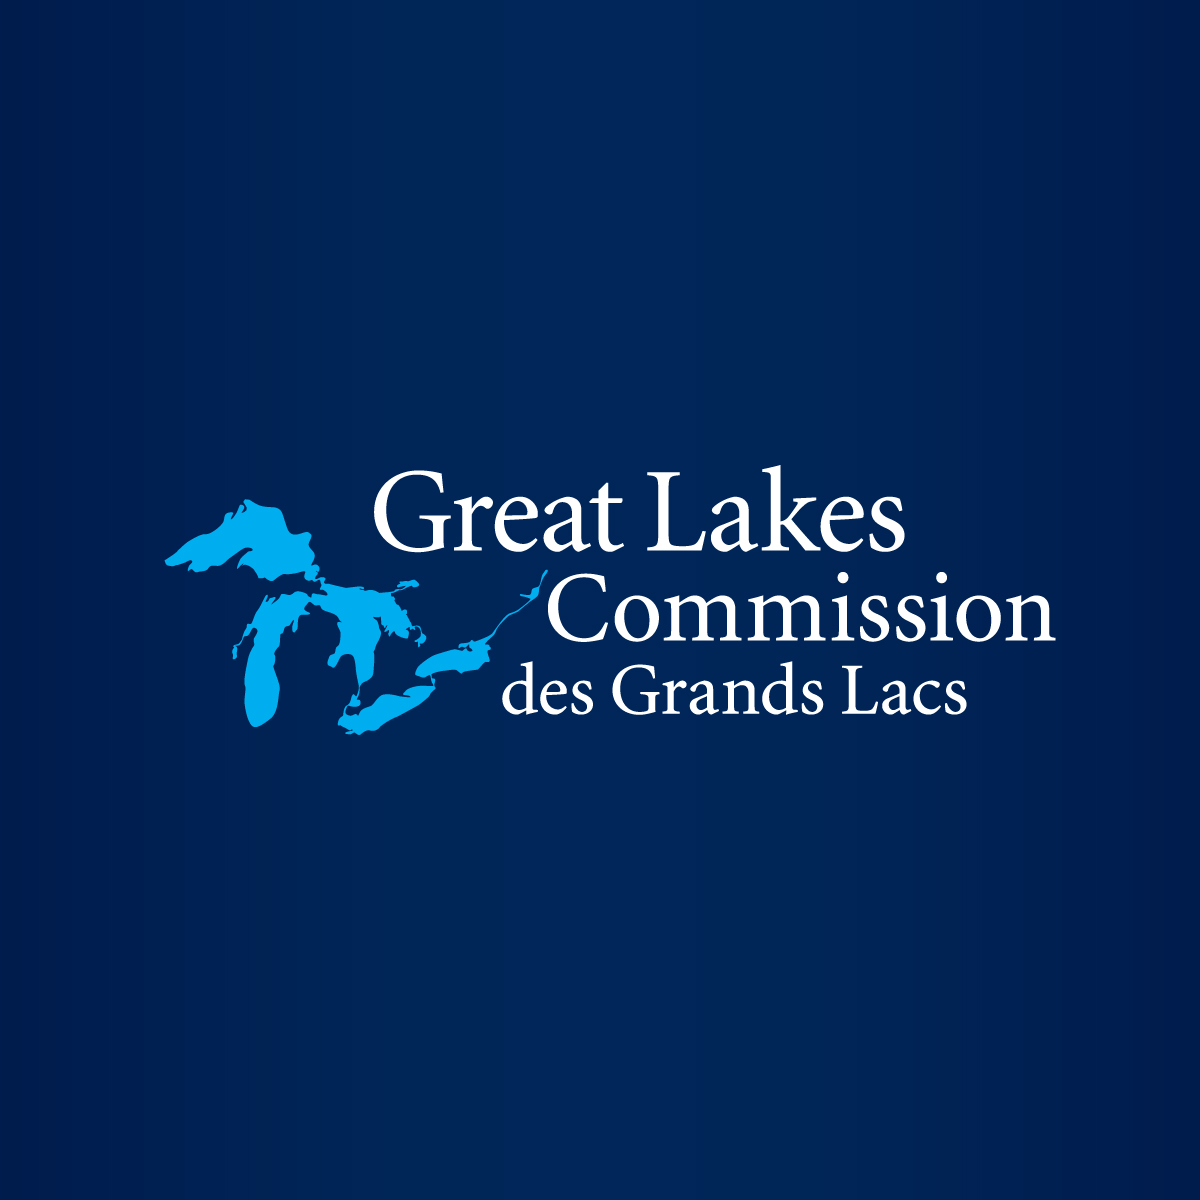 duluth area great lakes restoration projects funding announced